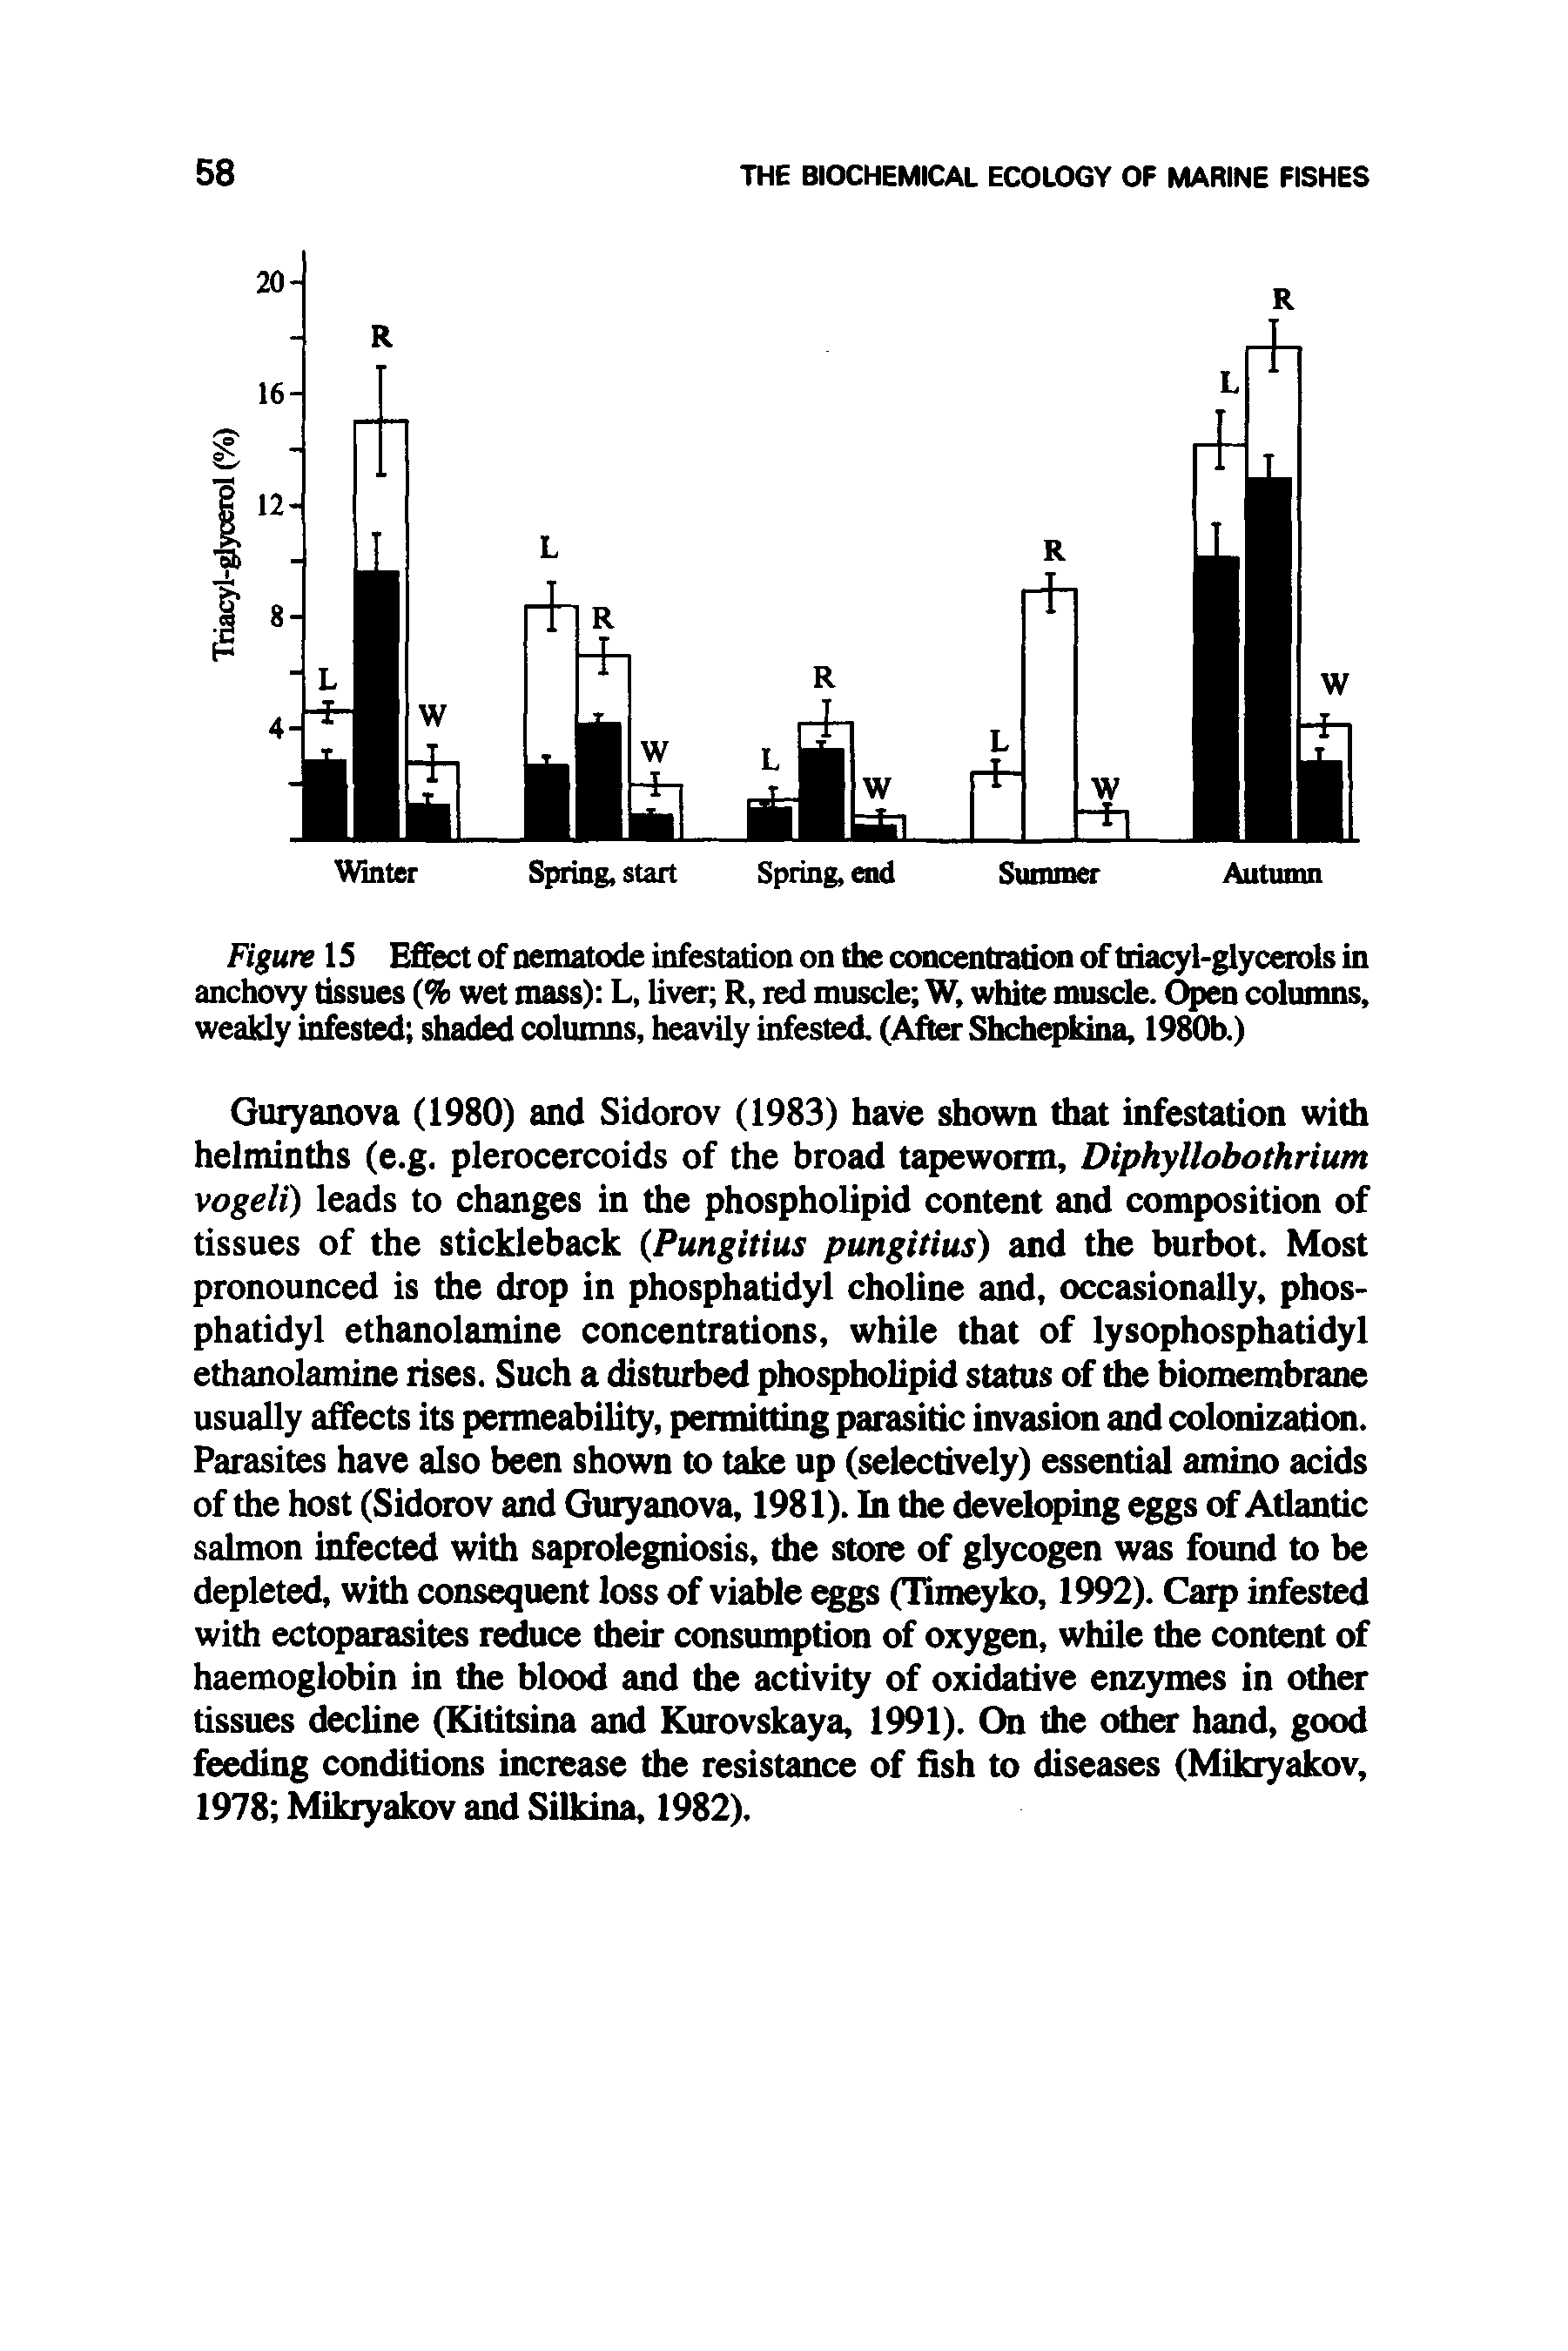 Figure 15 Effect of nematode infestation on the concentration of triacyl-glycerols in anchovy tissues (% wet mass) L, liver R, red muscle W, white muscle. Open columns, weakly infested shaded columns, heavily infested. (After Shchepkina, 1980b.)...